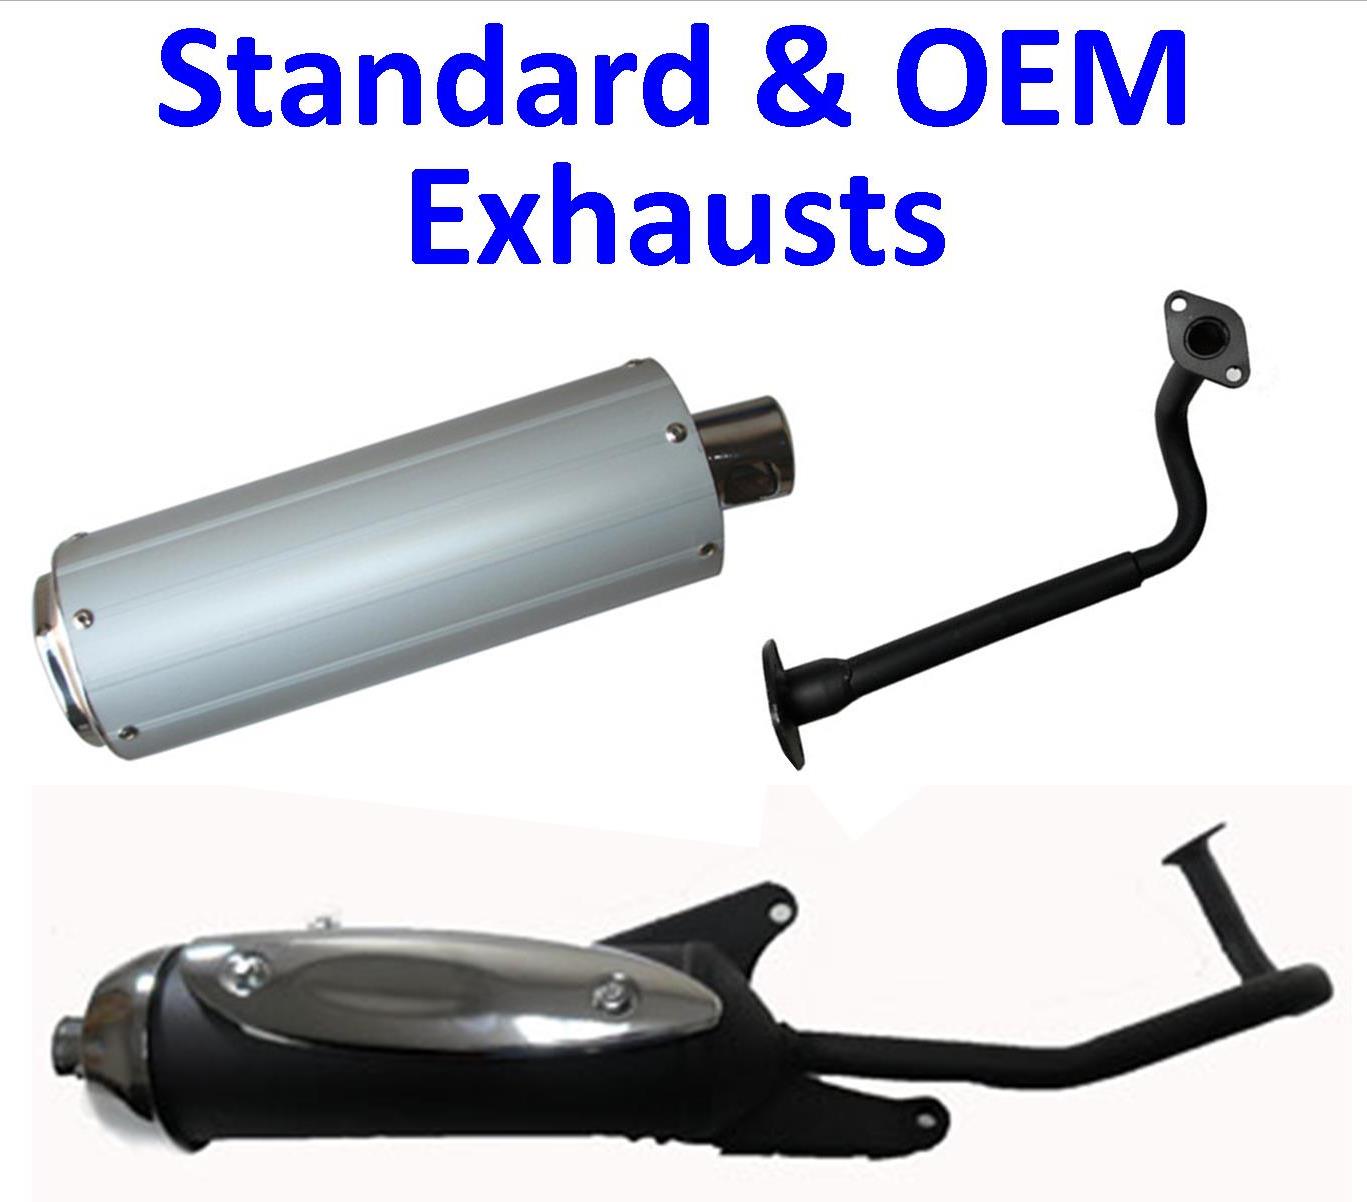 4 Stroke 49cc-150cc Scooter Standard and OEM Exhausts